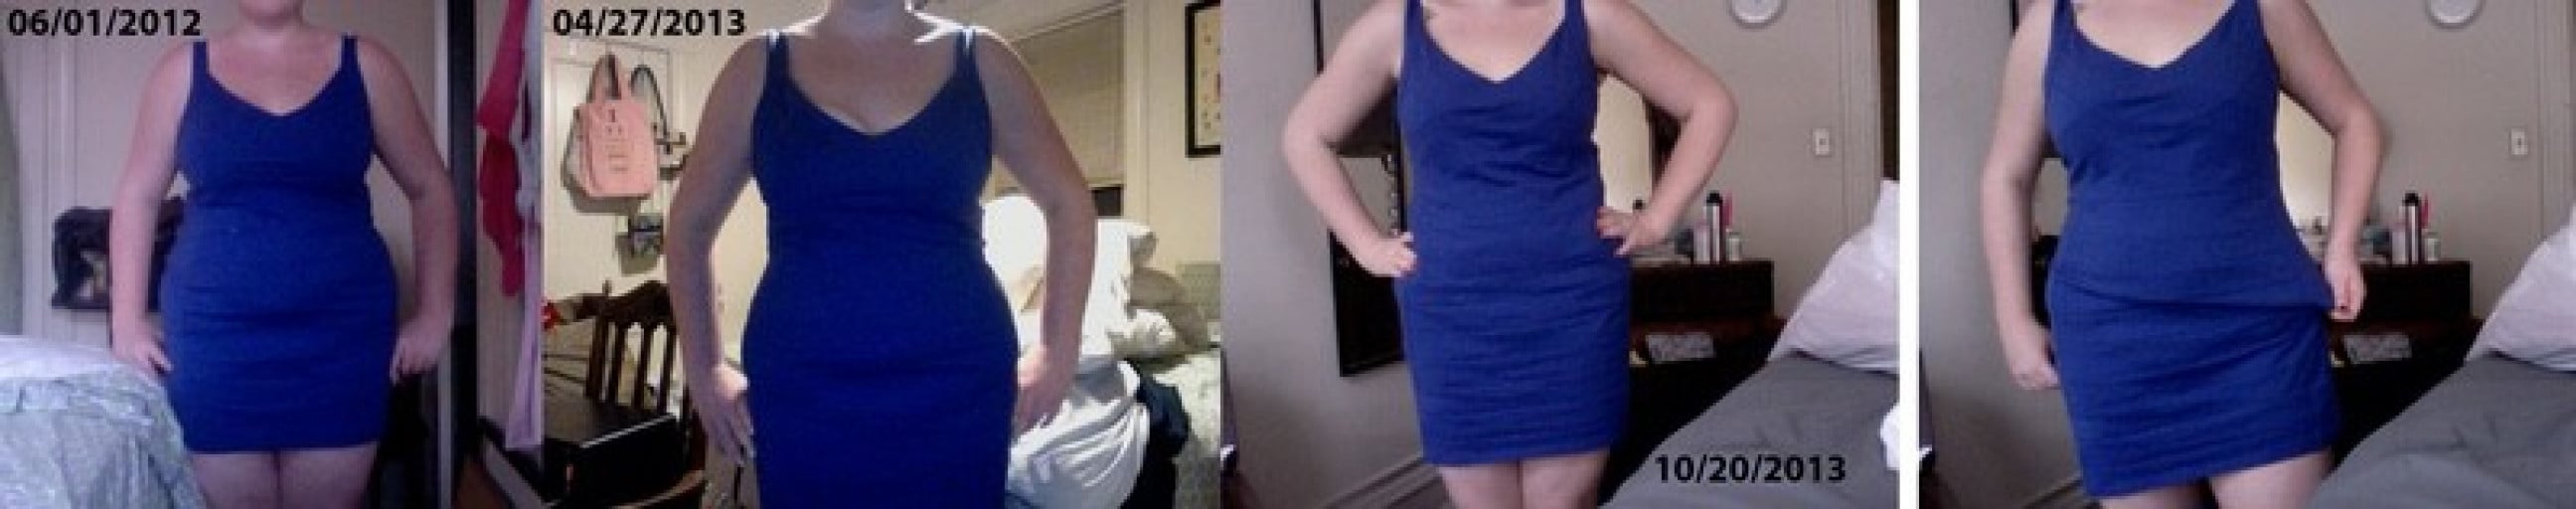 39Lbs Weight Loss Journey: How Reddit User Zoeypantalones Did It